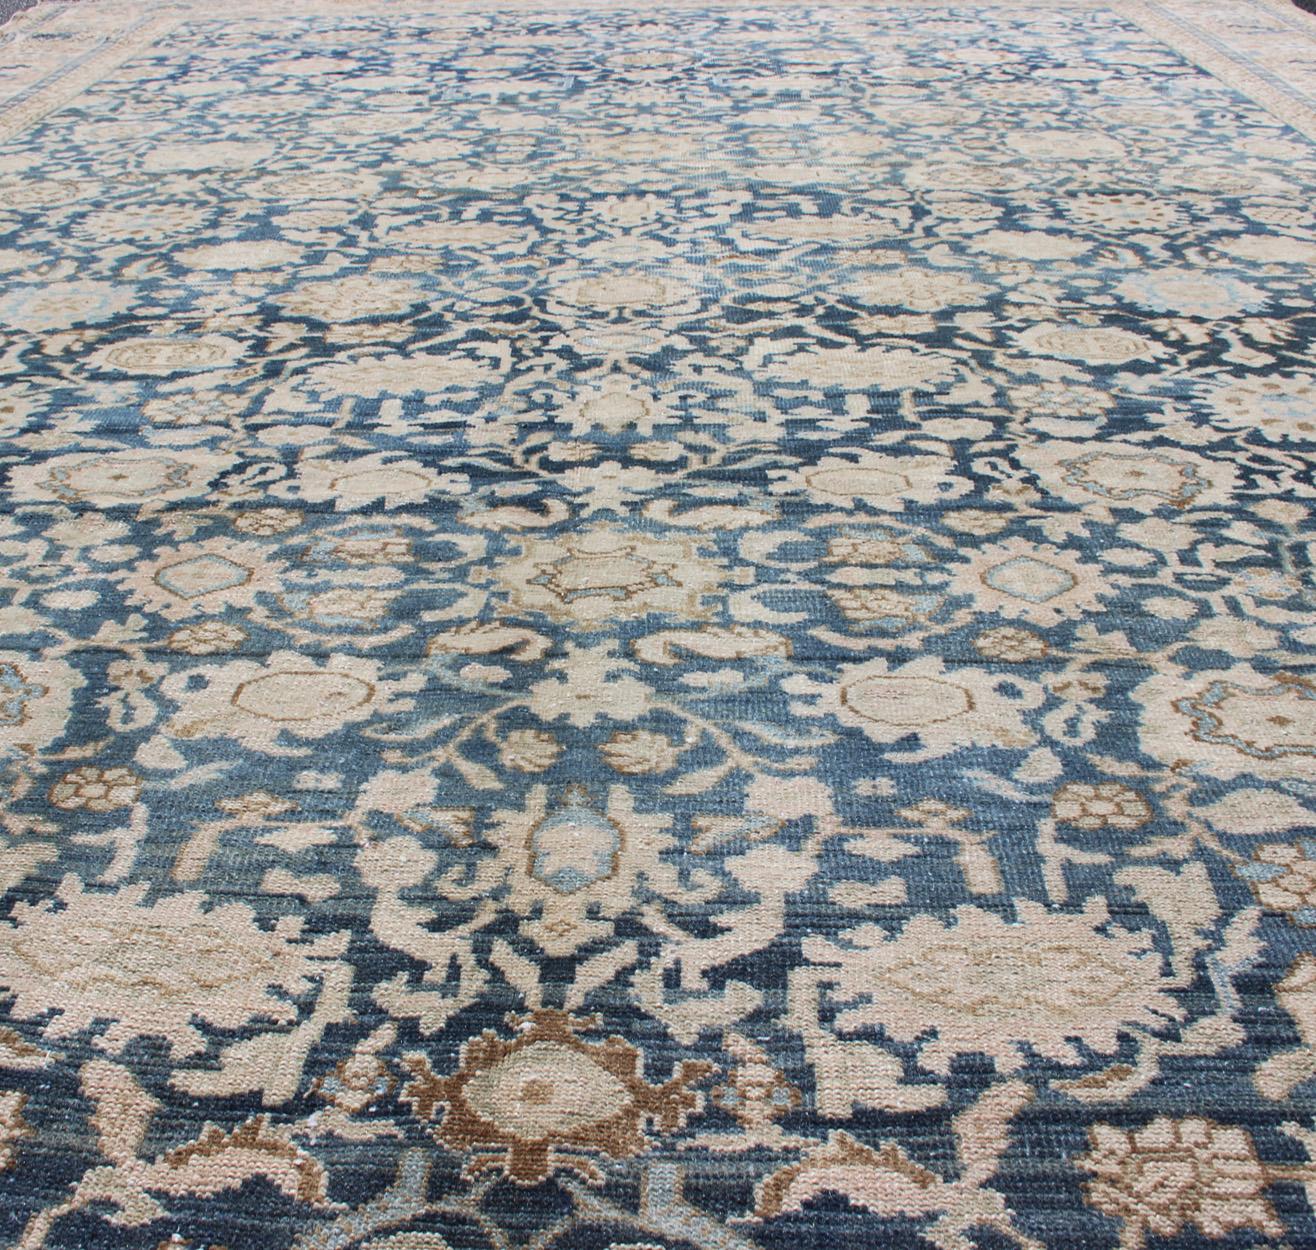 All-Over Blue Floral Persian Hamadan Rug in Navy Blue and Earthy Tones For Sale 1